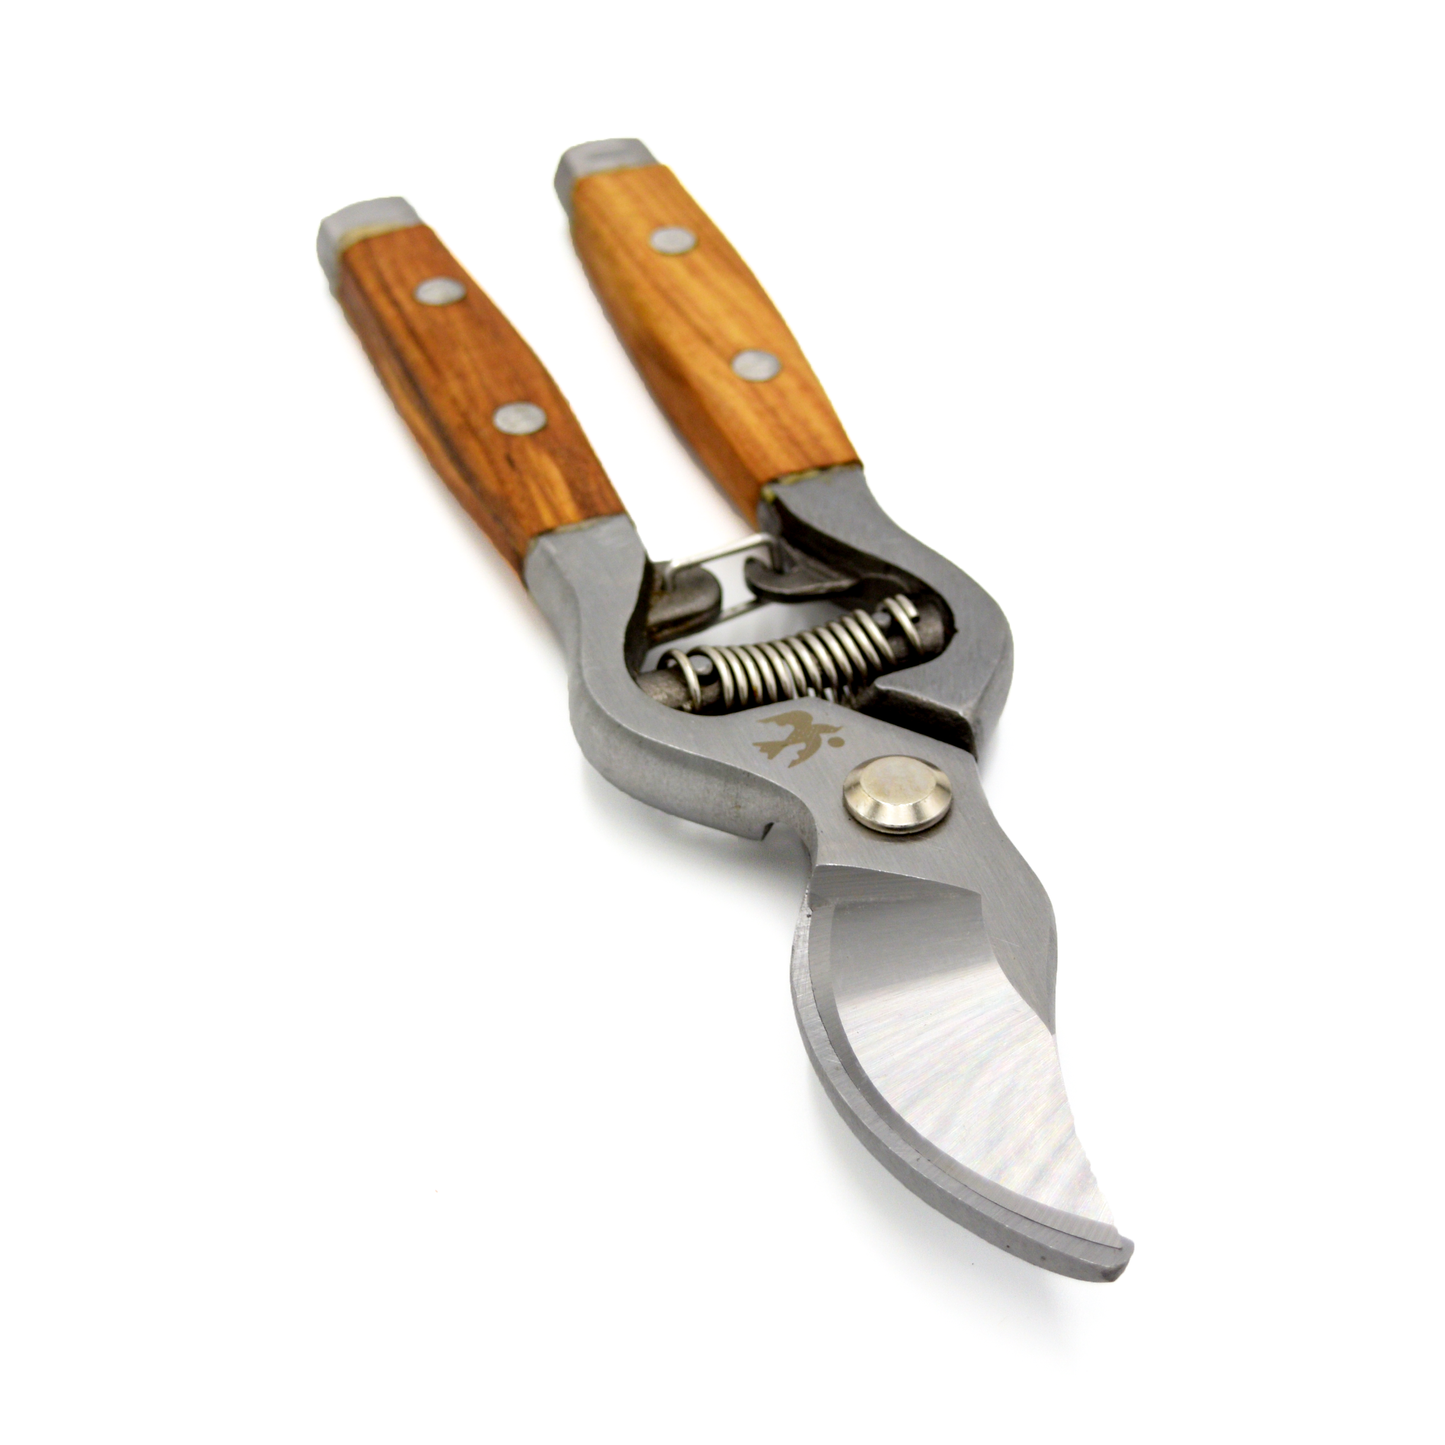 Secateurs with Wood Handle Gift Box